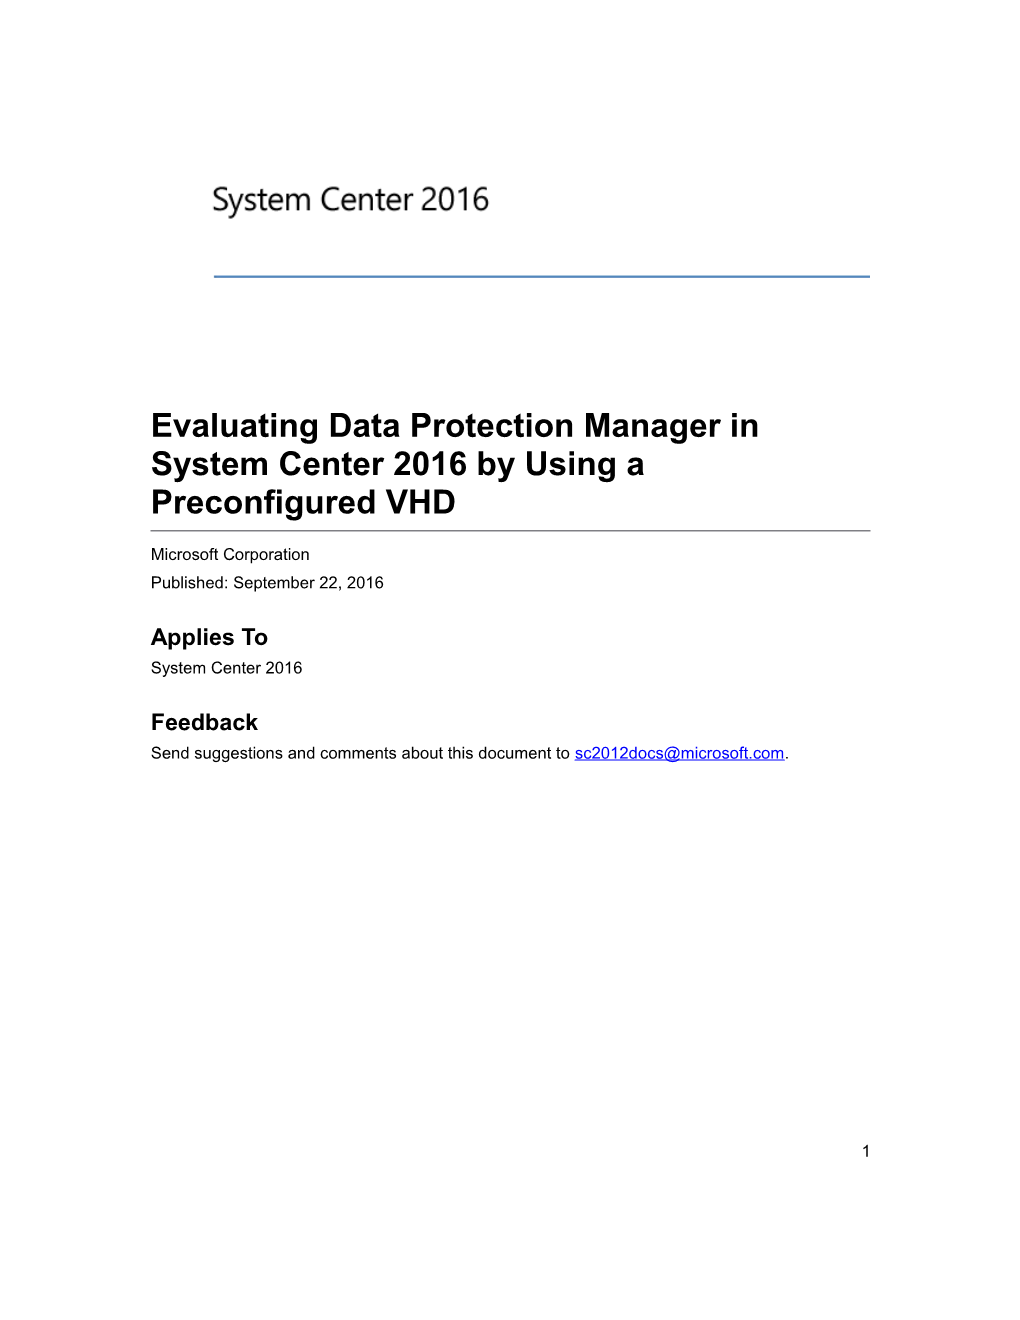 Evaluating Data Protection Manager in System Center 2016 by Using a Preconfigured VHD